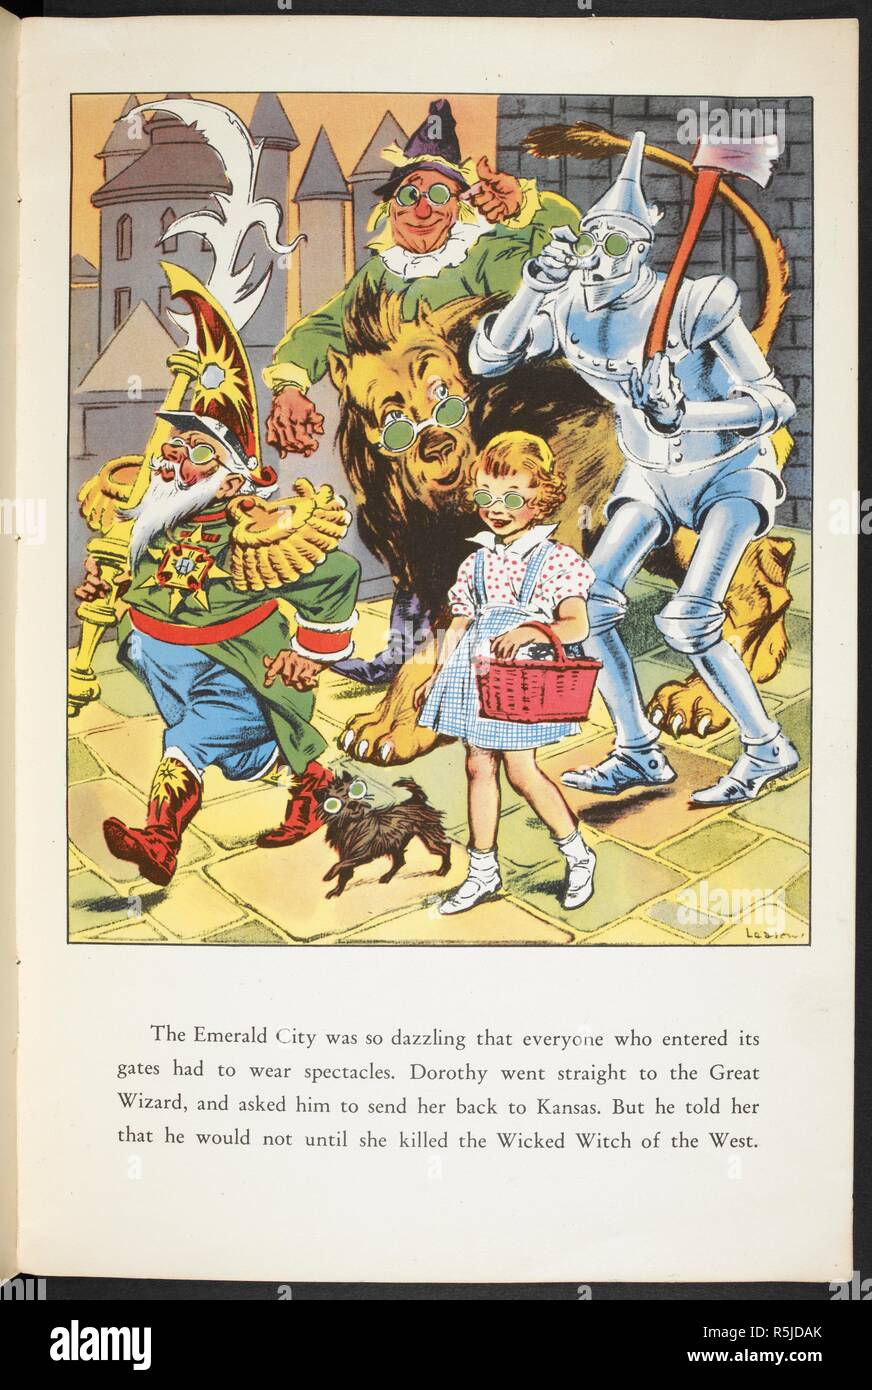 'The emerald city was so dazzling that everyone who entered its gates had to wear spectacles'. Dorothy and her companions. The Wizard of Oz picture book. London : Hutchinson, [1940]. Source: LB.31.c.9373 page 4. Author: BAUM, LYMAN FRANK. Leason, Percy Alexander. Stock Photo